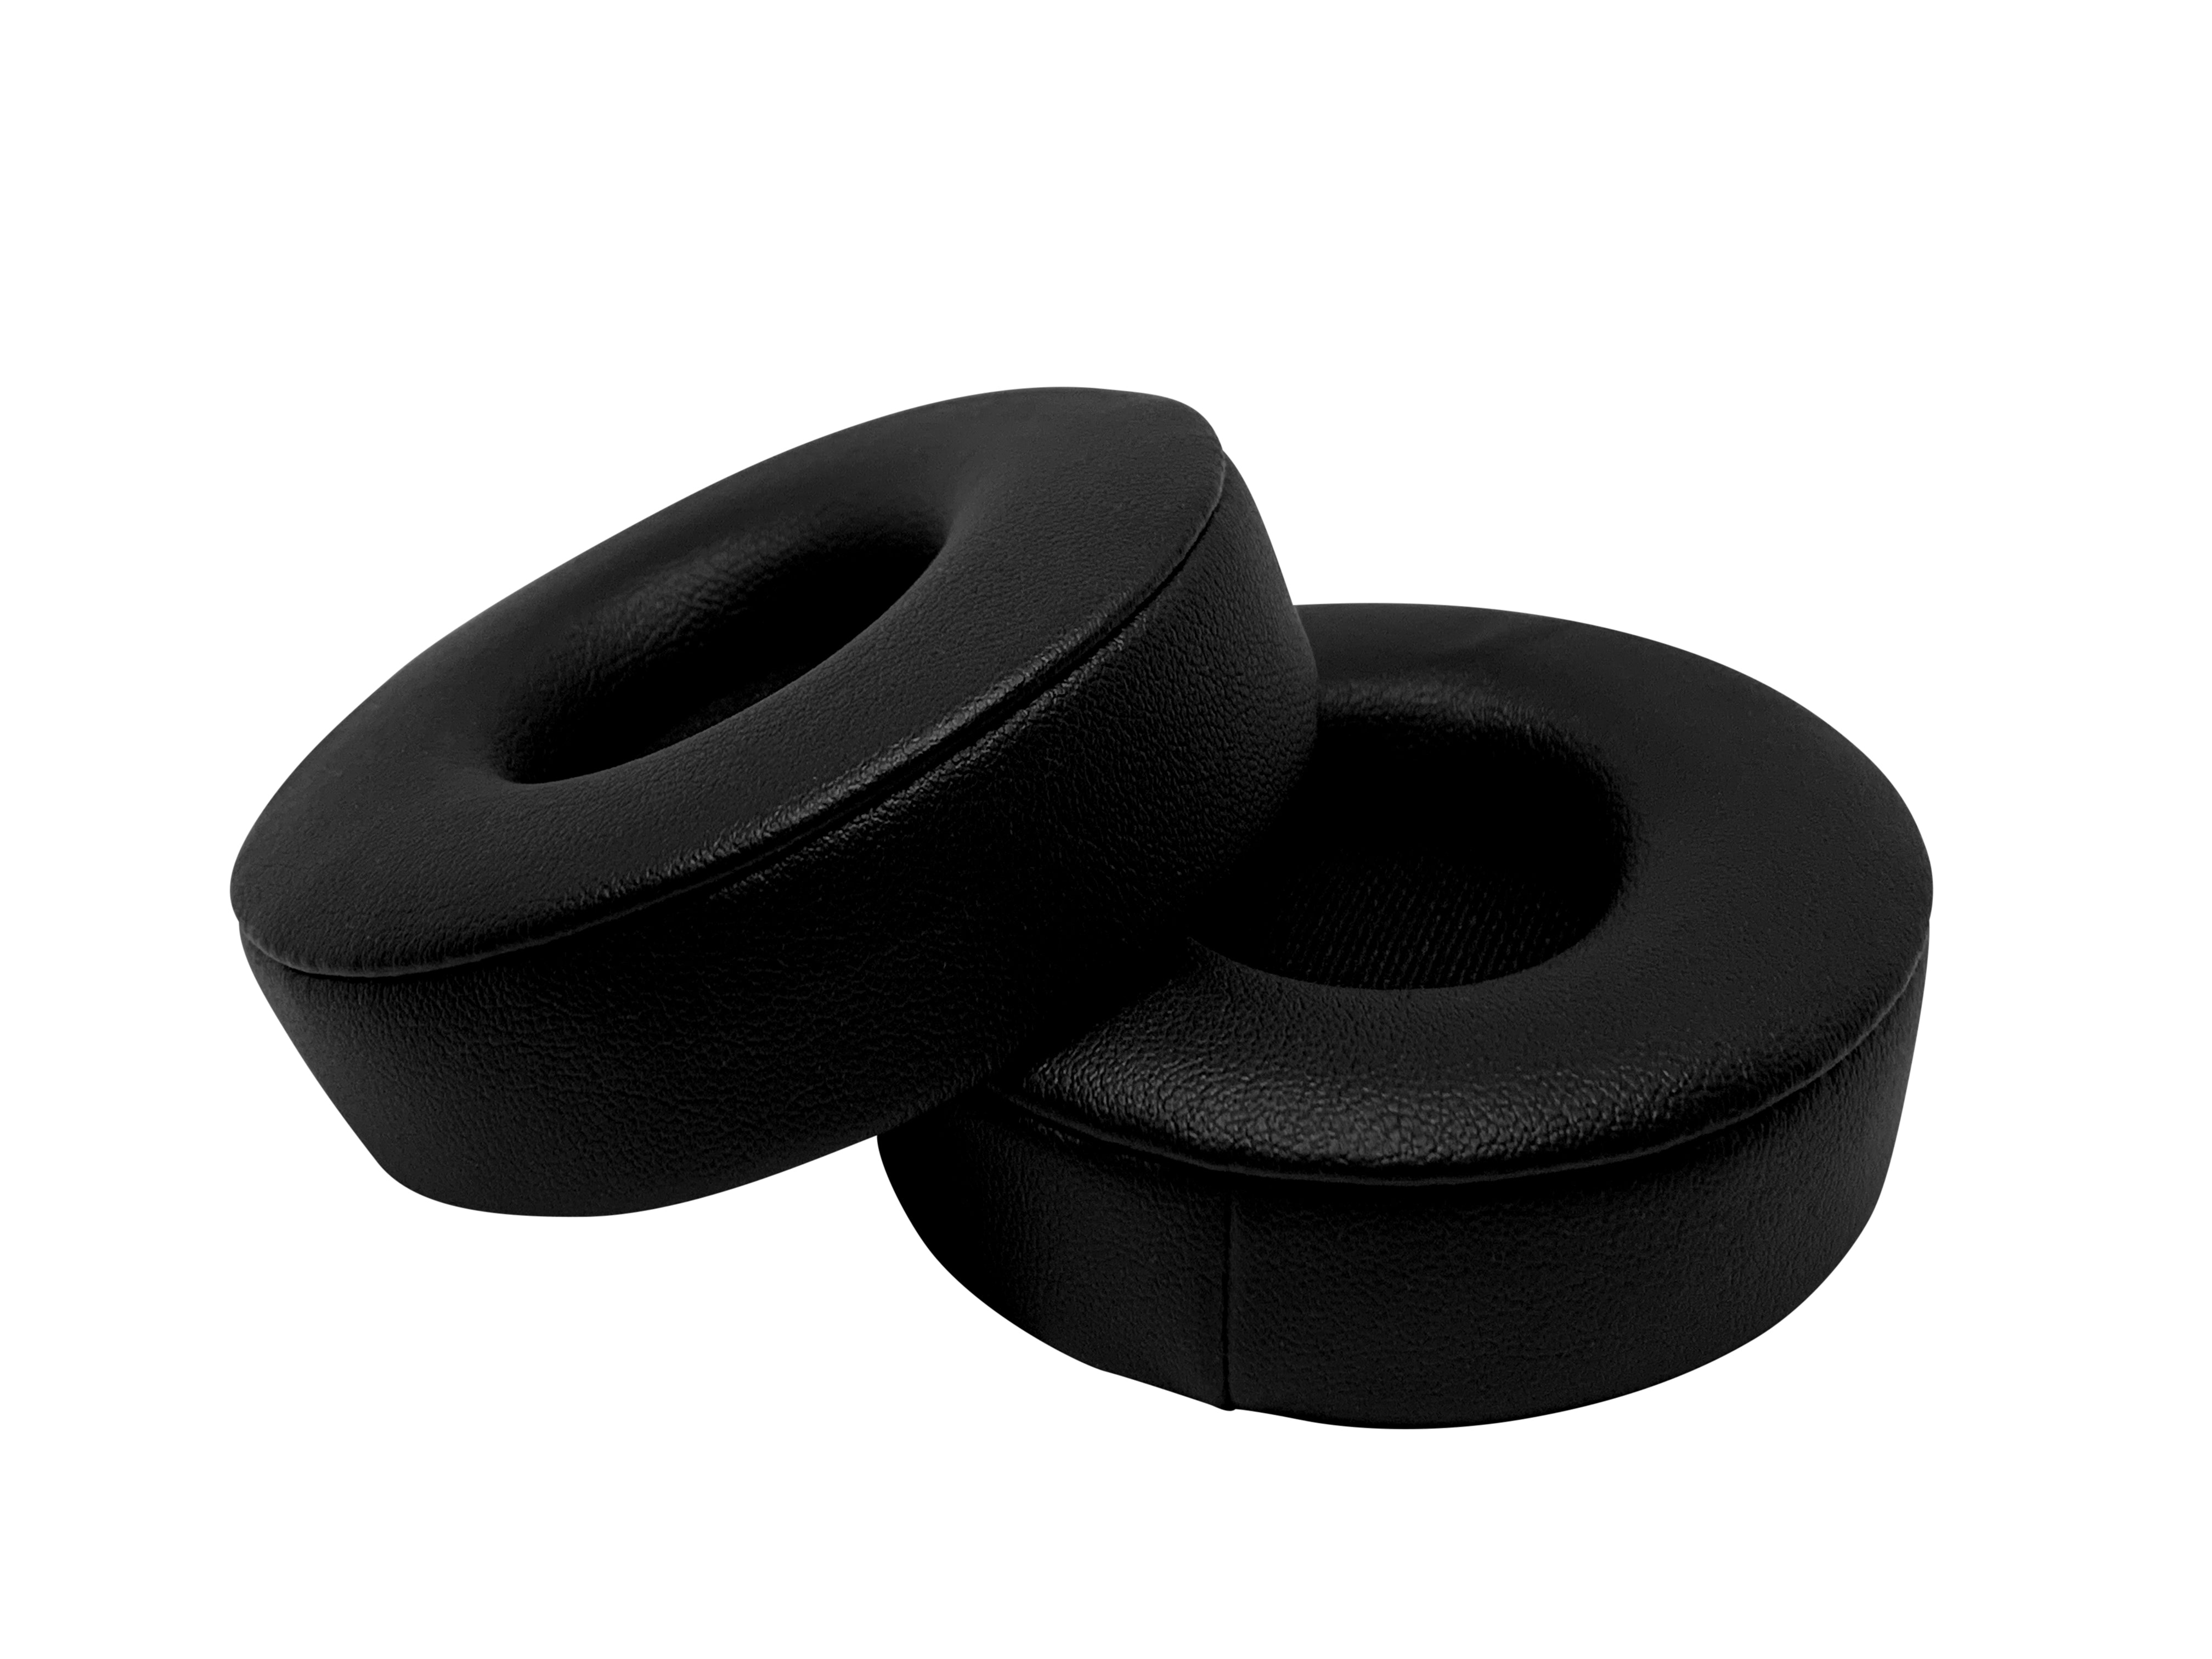 en lille Manifold skille sig ud Replacement Ear Pads Cushions for Beats SOLO PRO Wireless Headphones Parts